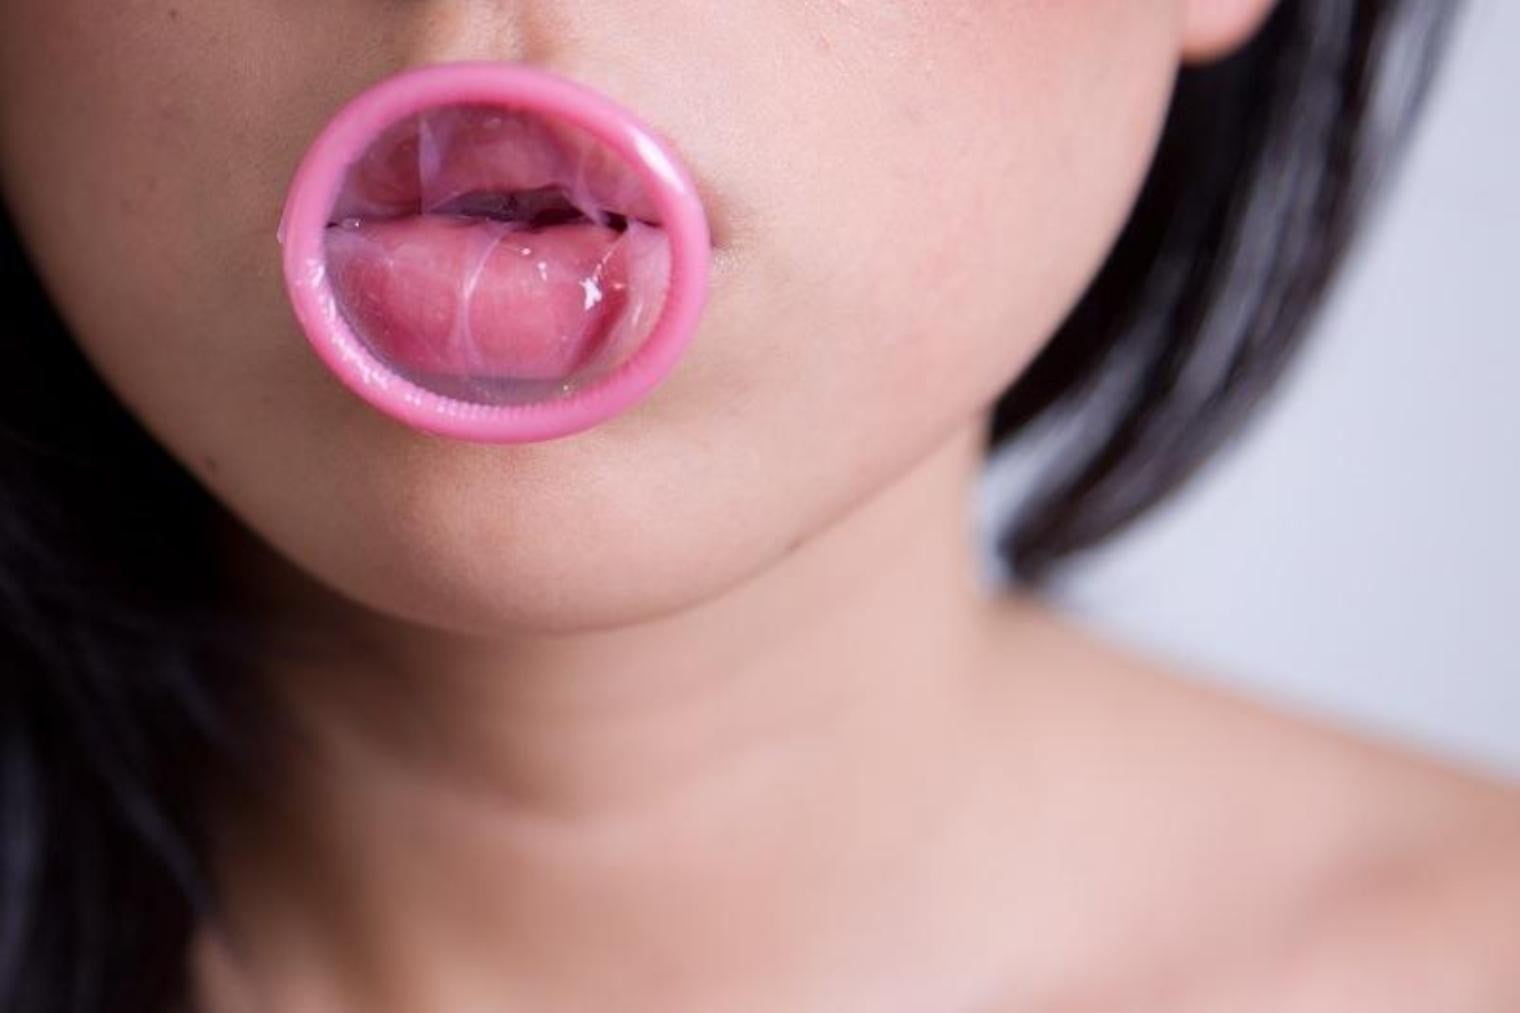 Pink Condom In Person's Mouth Hd Wallpaper - Girl Condom In Mouth , HD Wallpaper & Backgrounds